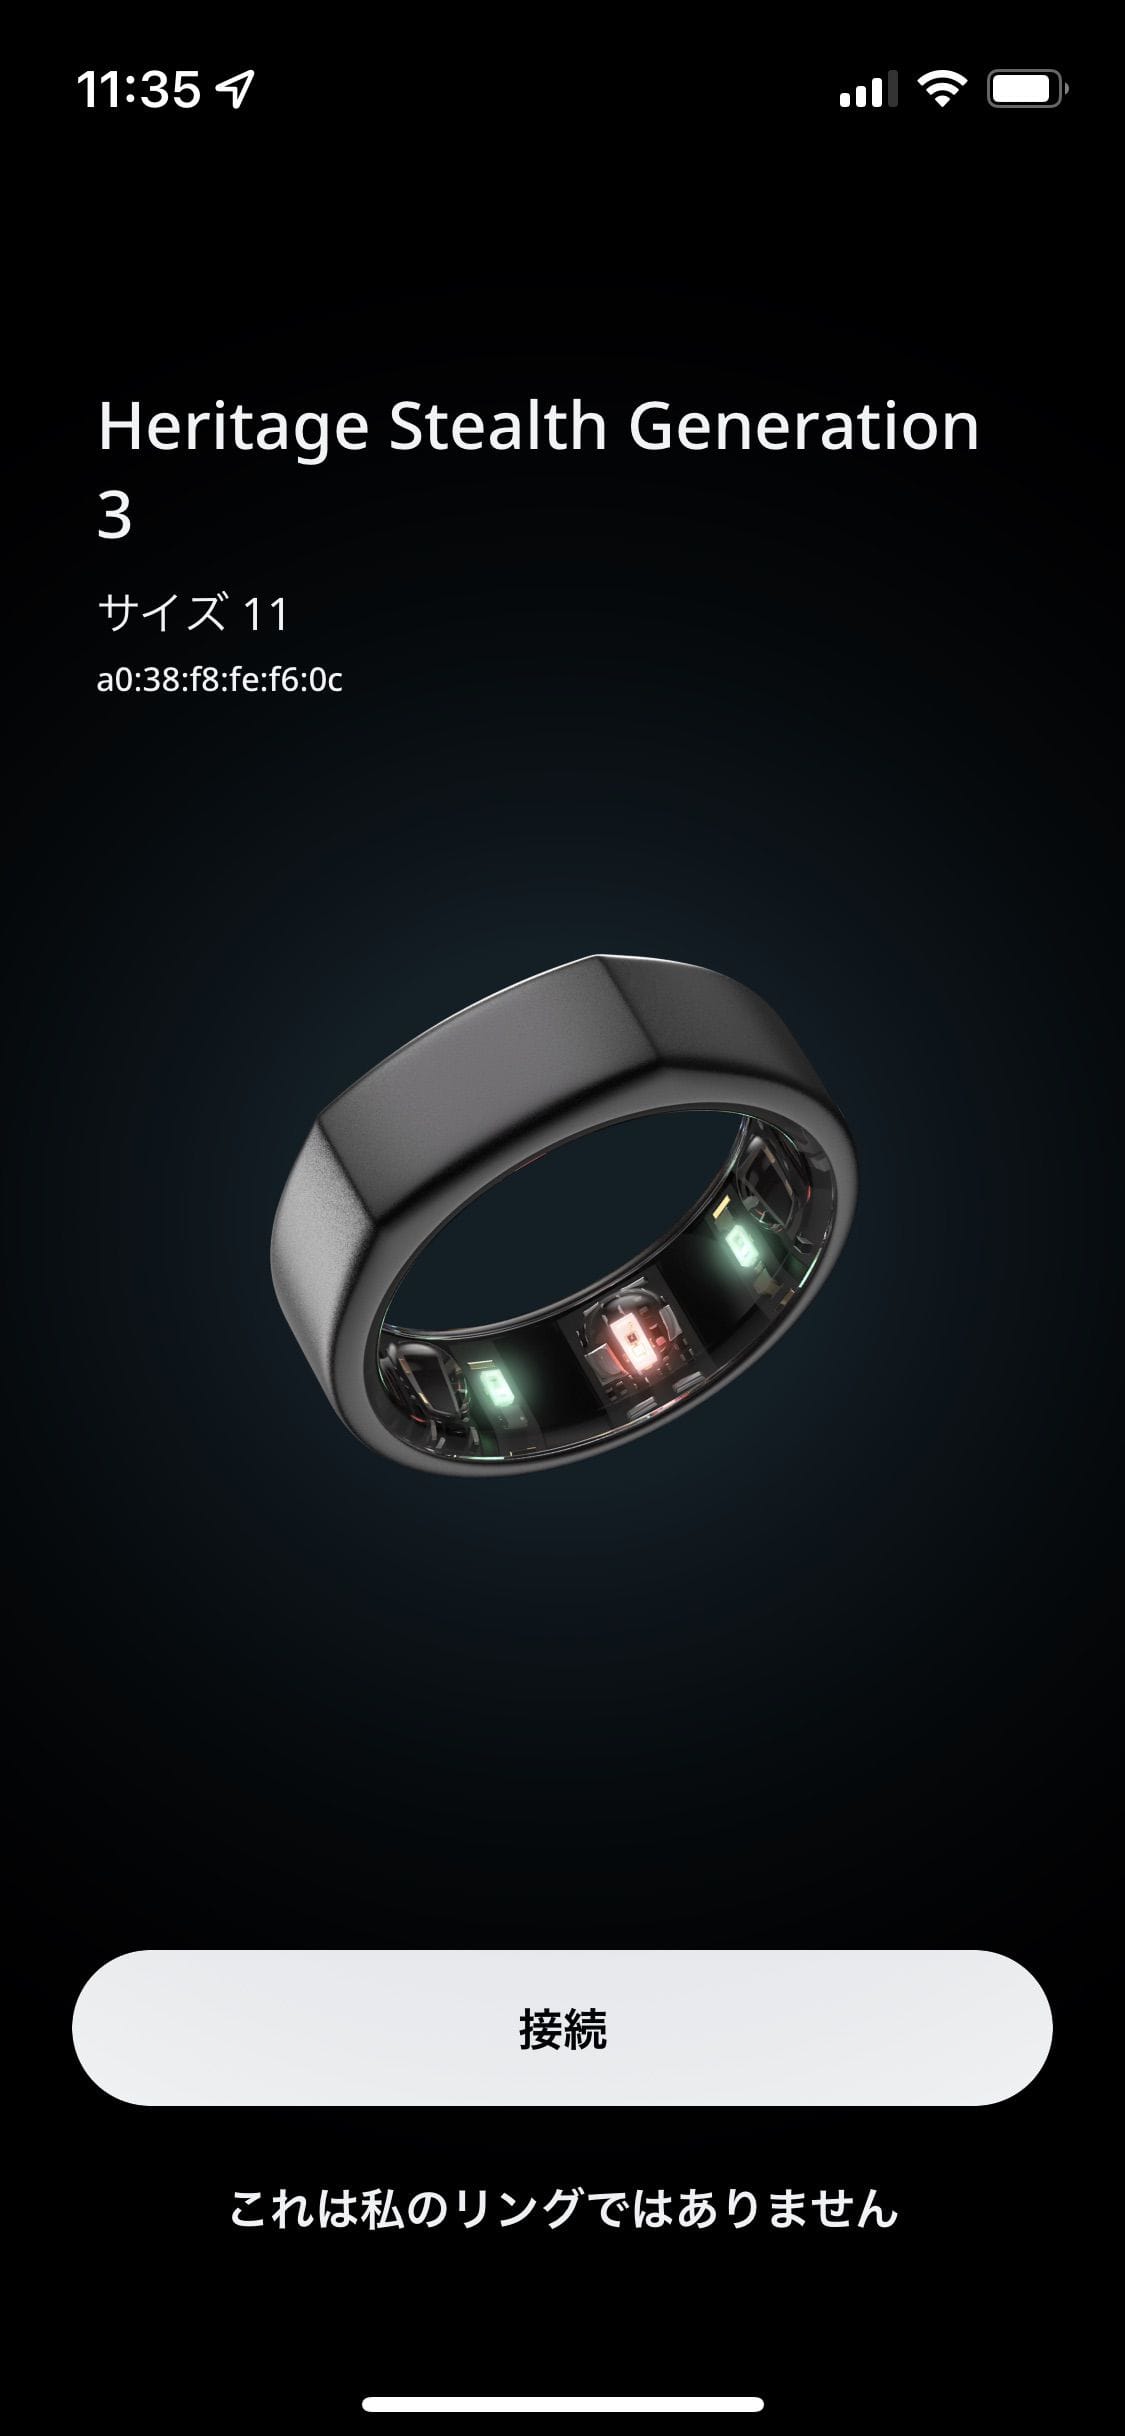 Oura Ring 3の初期設定方法